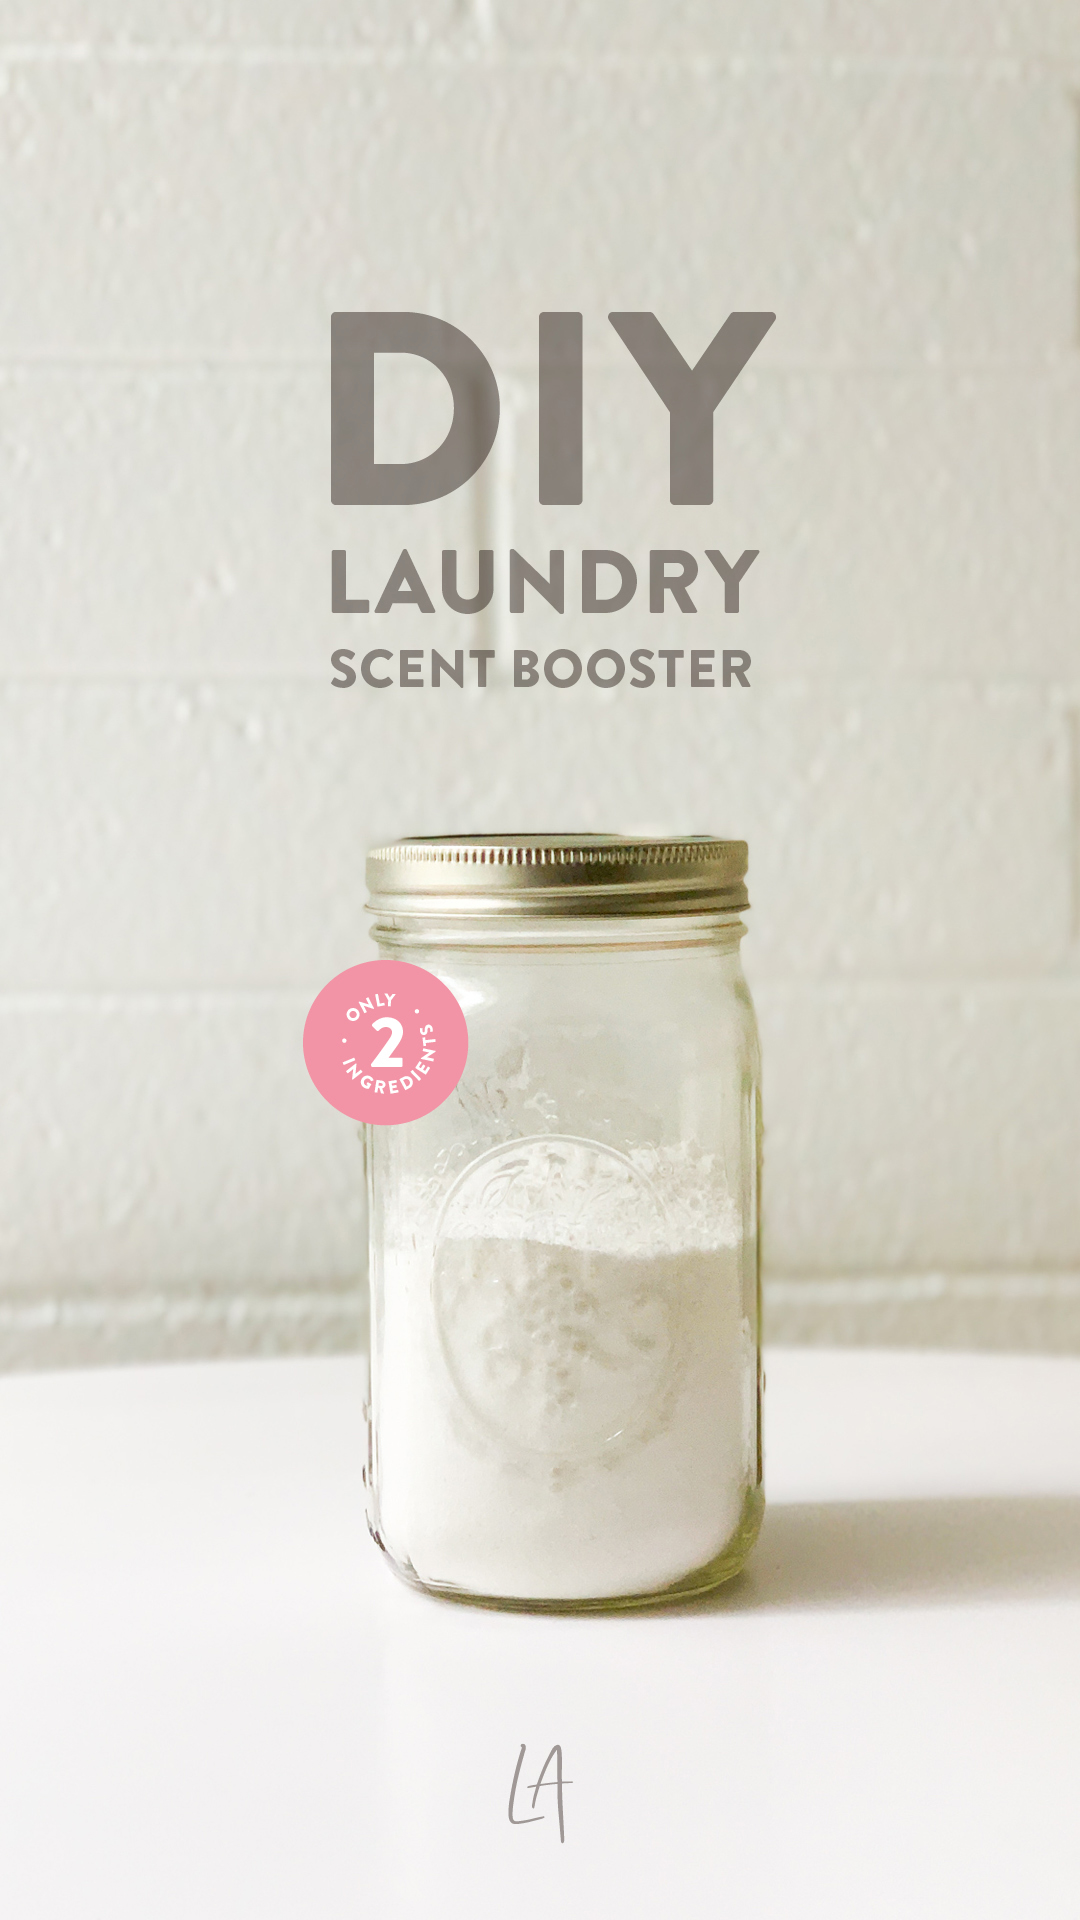 How to make your laundry smell good